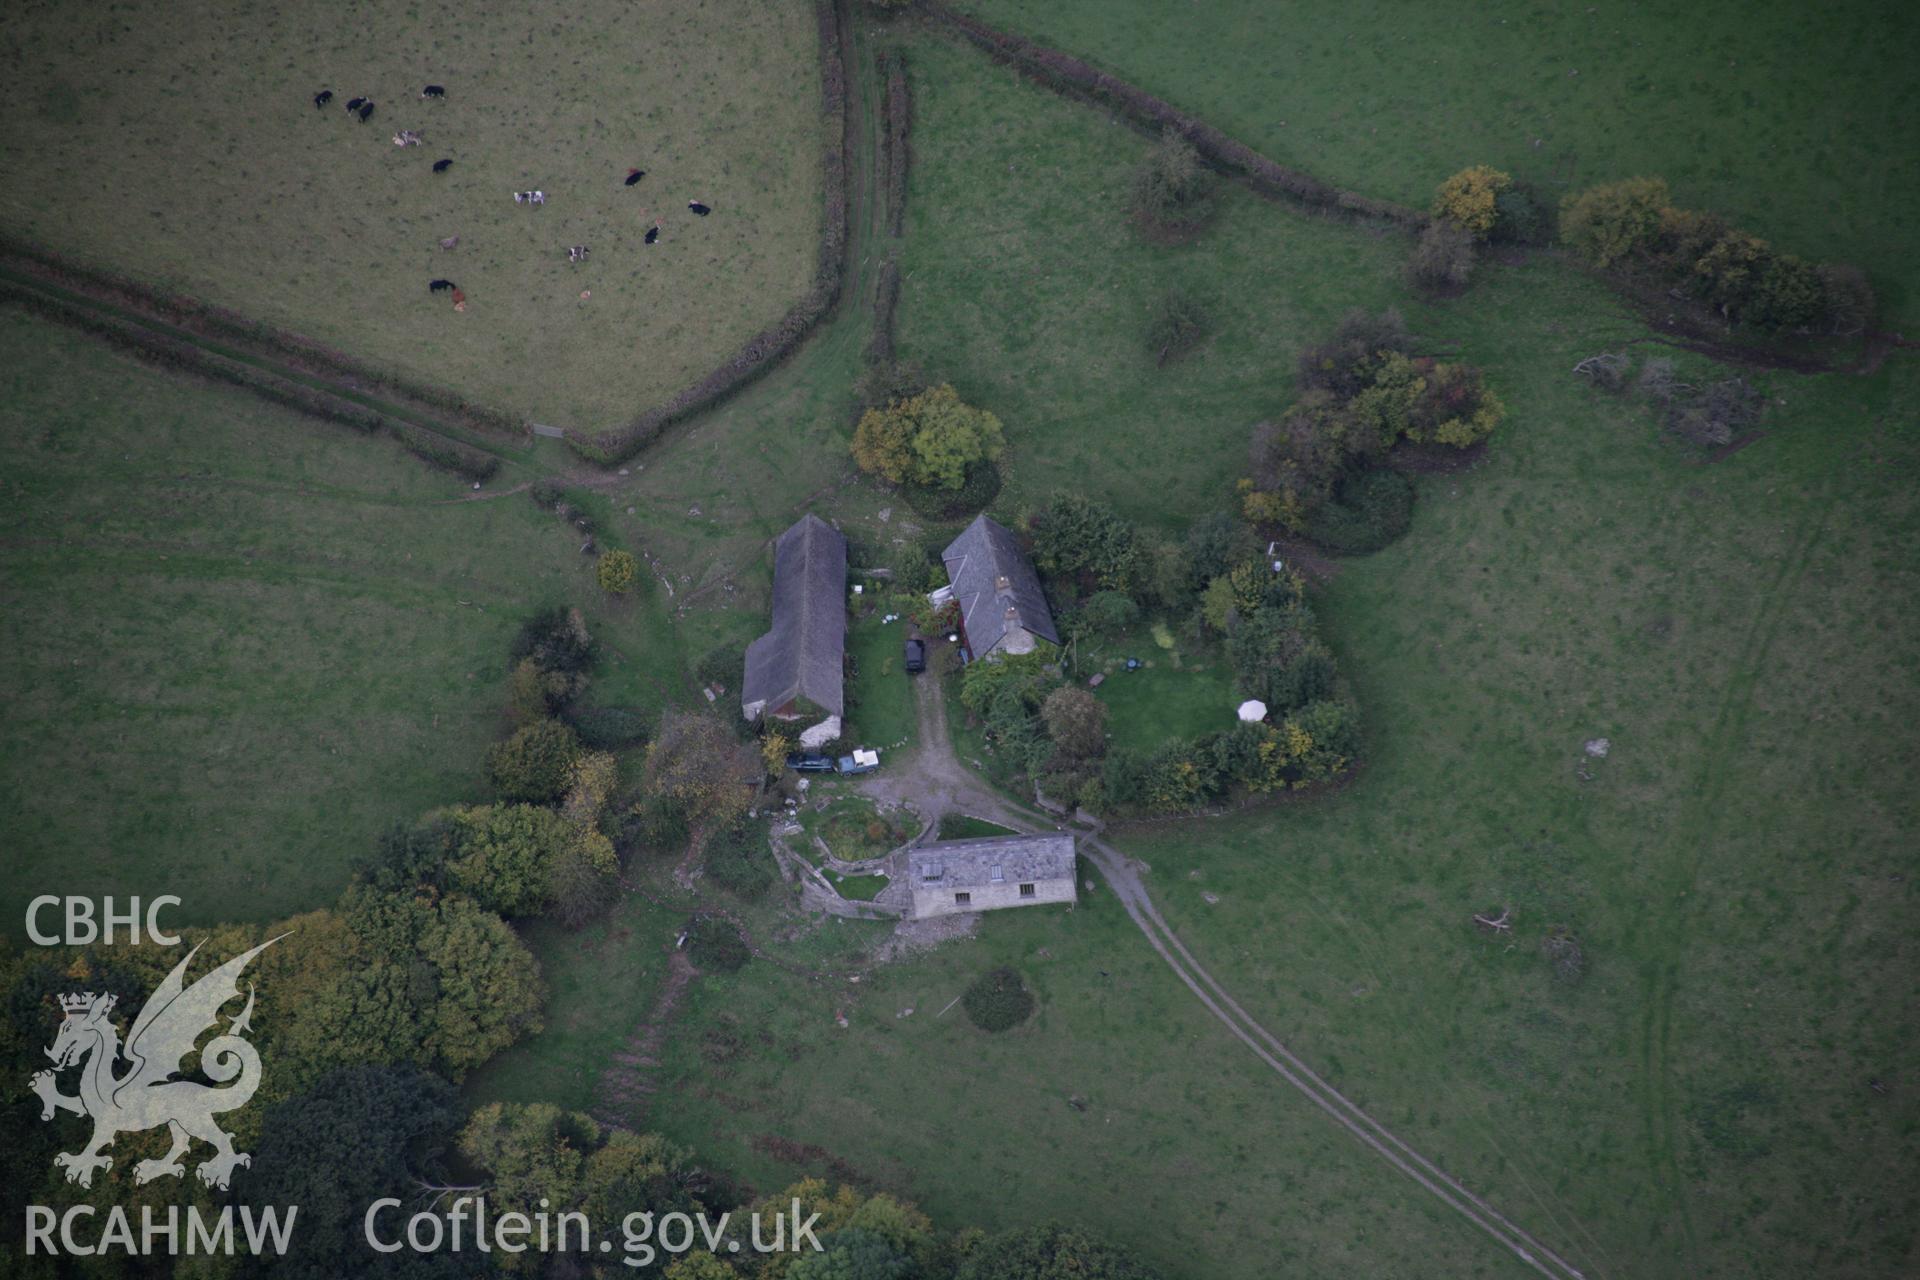 RCAHMW colour oblique aerial photograph of Hafodygarreg from the south-east. Taken on 13 October 2005 by Toby Driver